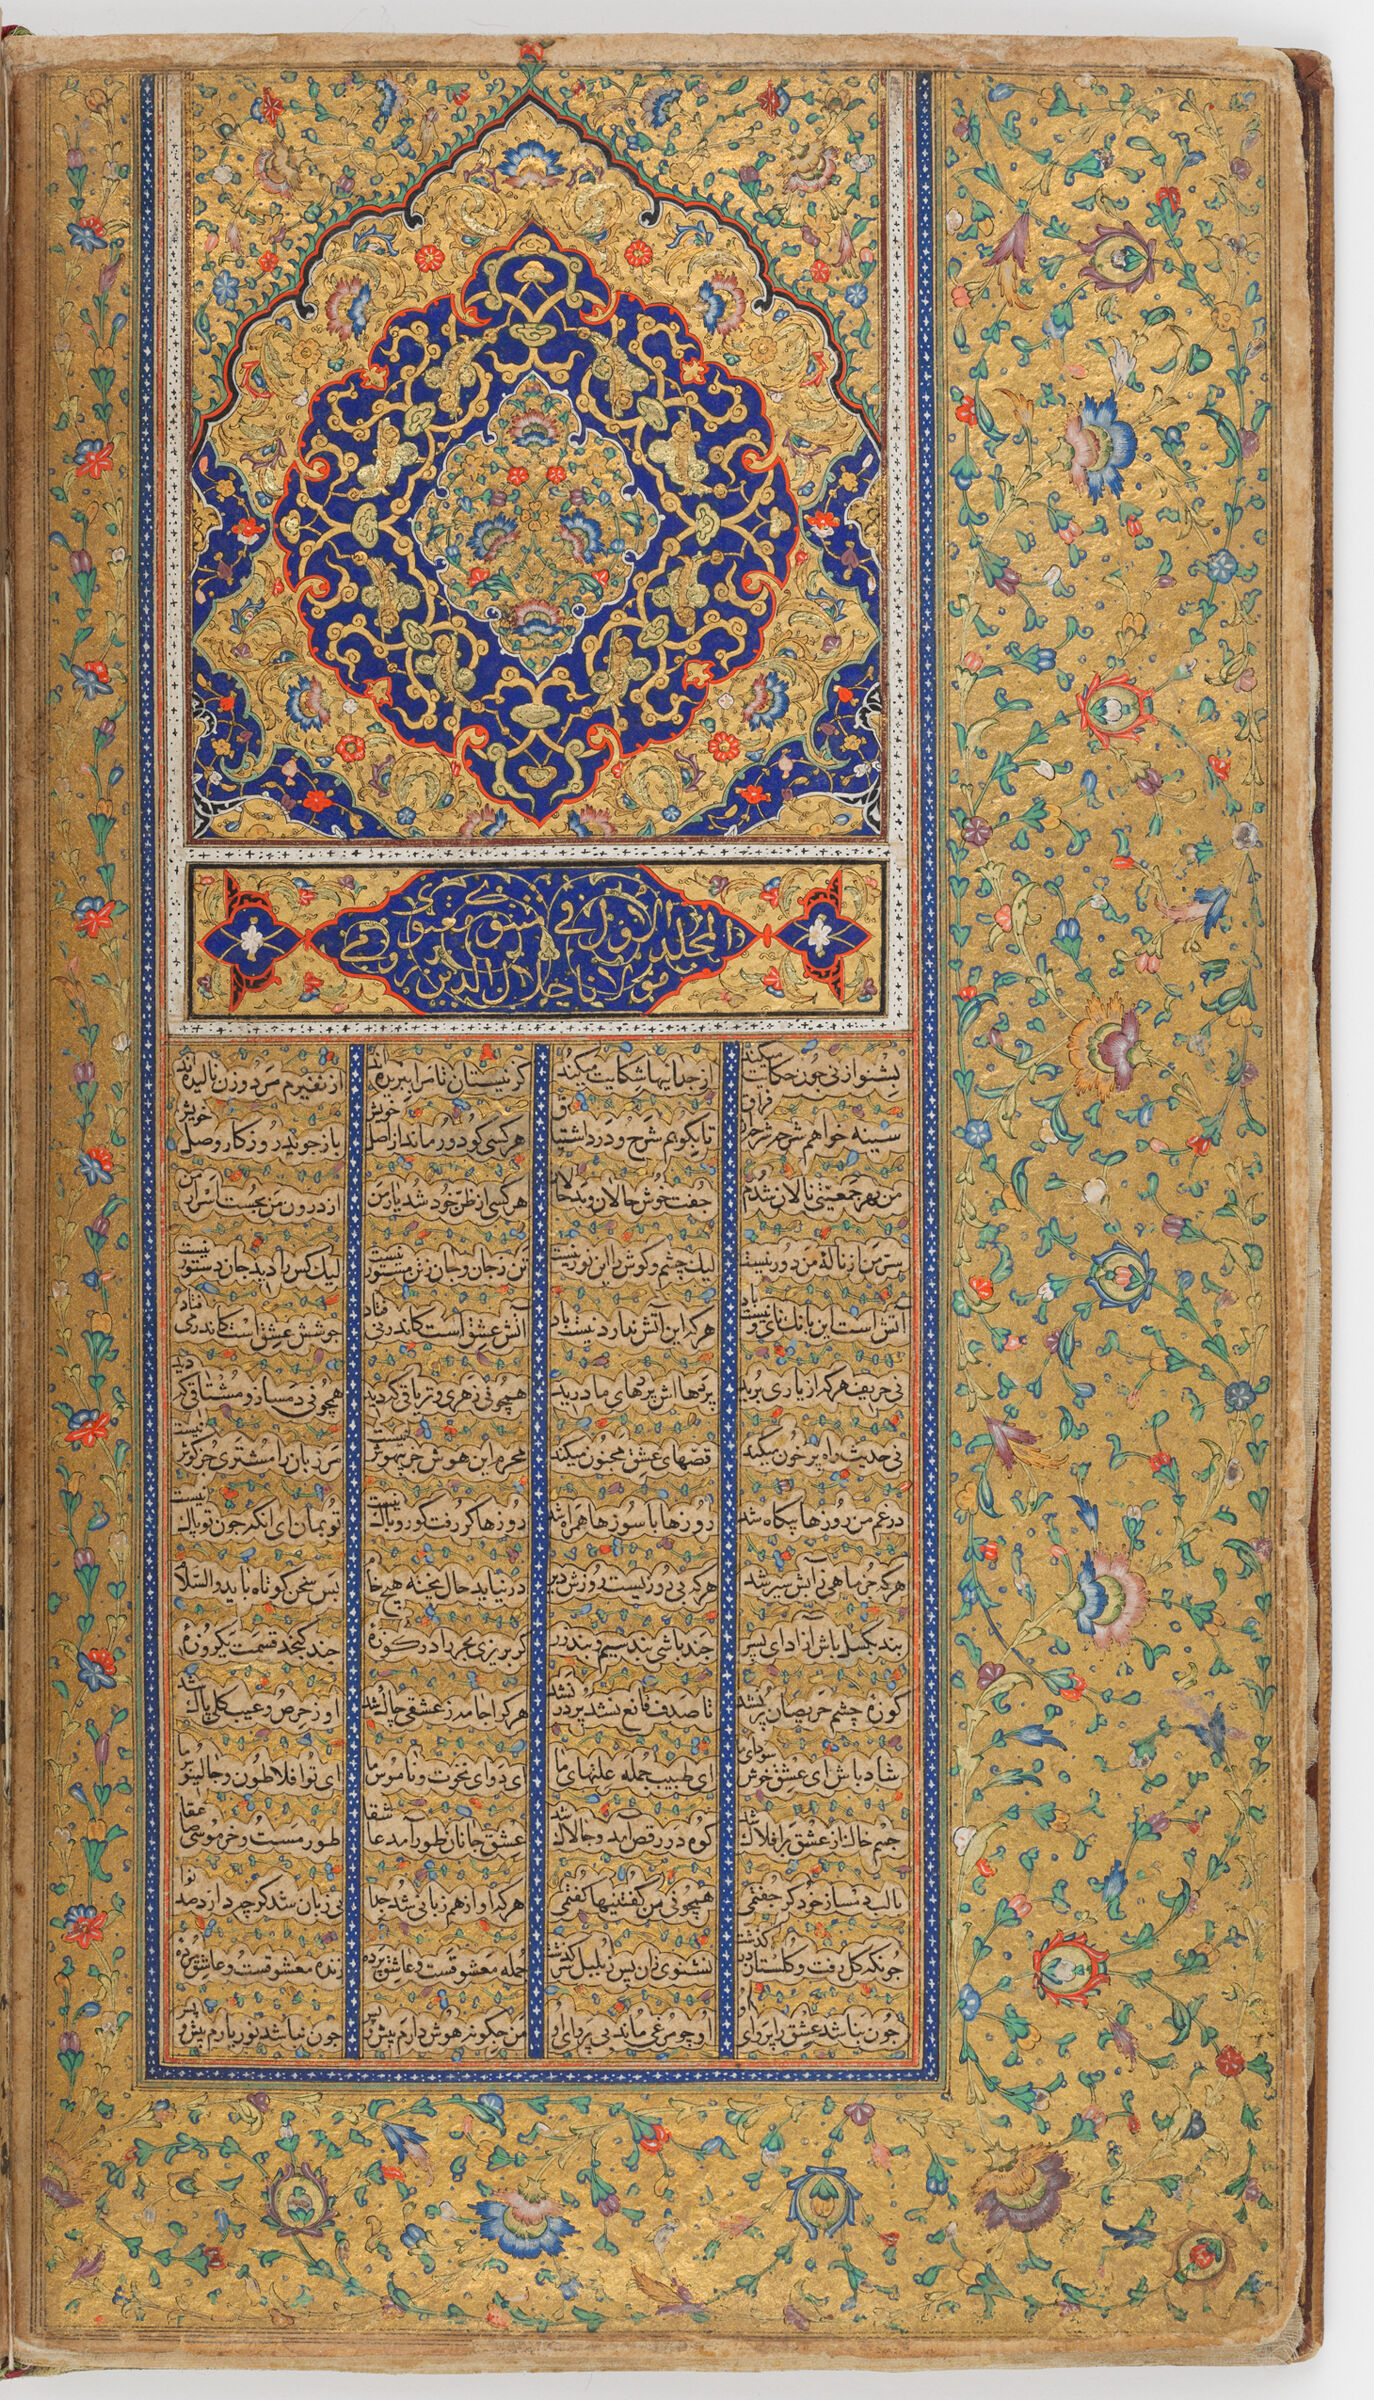 Sarlawh Of The Double-Page Illuminated Frontispiece; Ownership Notes And Seals (Notes And Seals Recto; Sarlawh Verso Of Folio 3), Folio From A Manuscript Of The Mathnavi Ma‘navi By Maulana
Jalal Al-Din Rumi